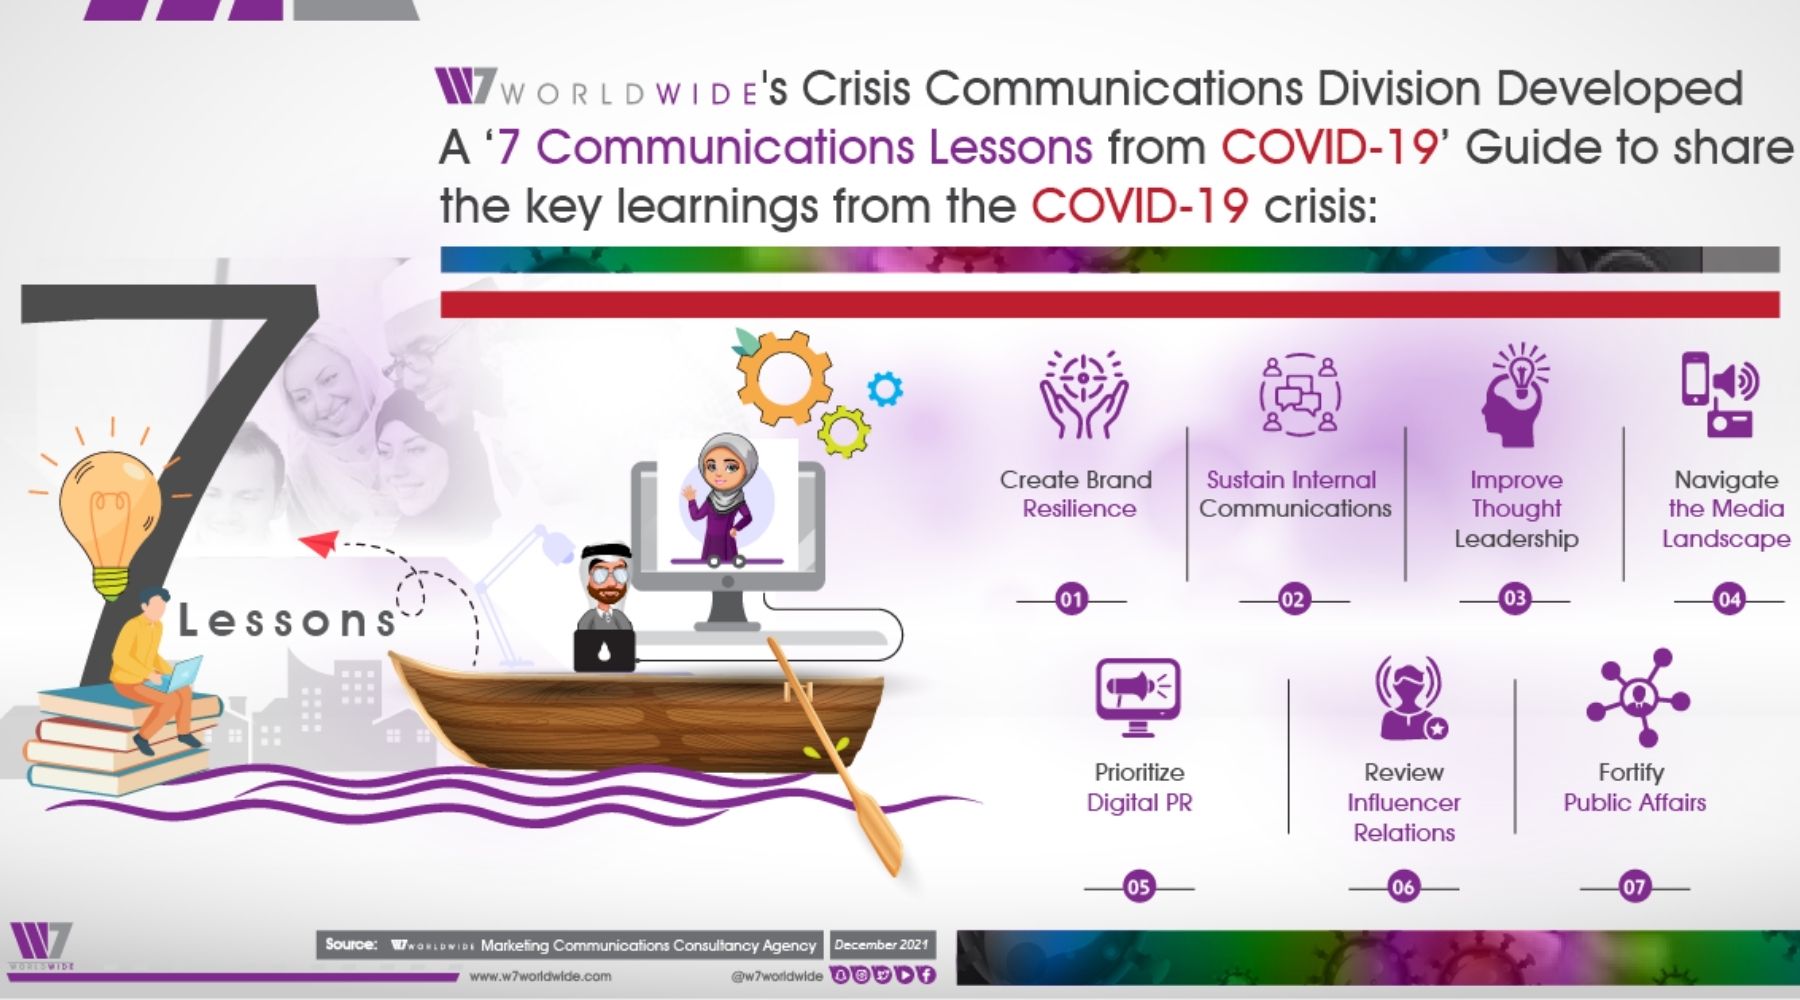 W7Worldwide Shares 7 Communications Lessons from COVID-19